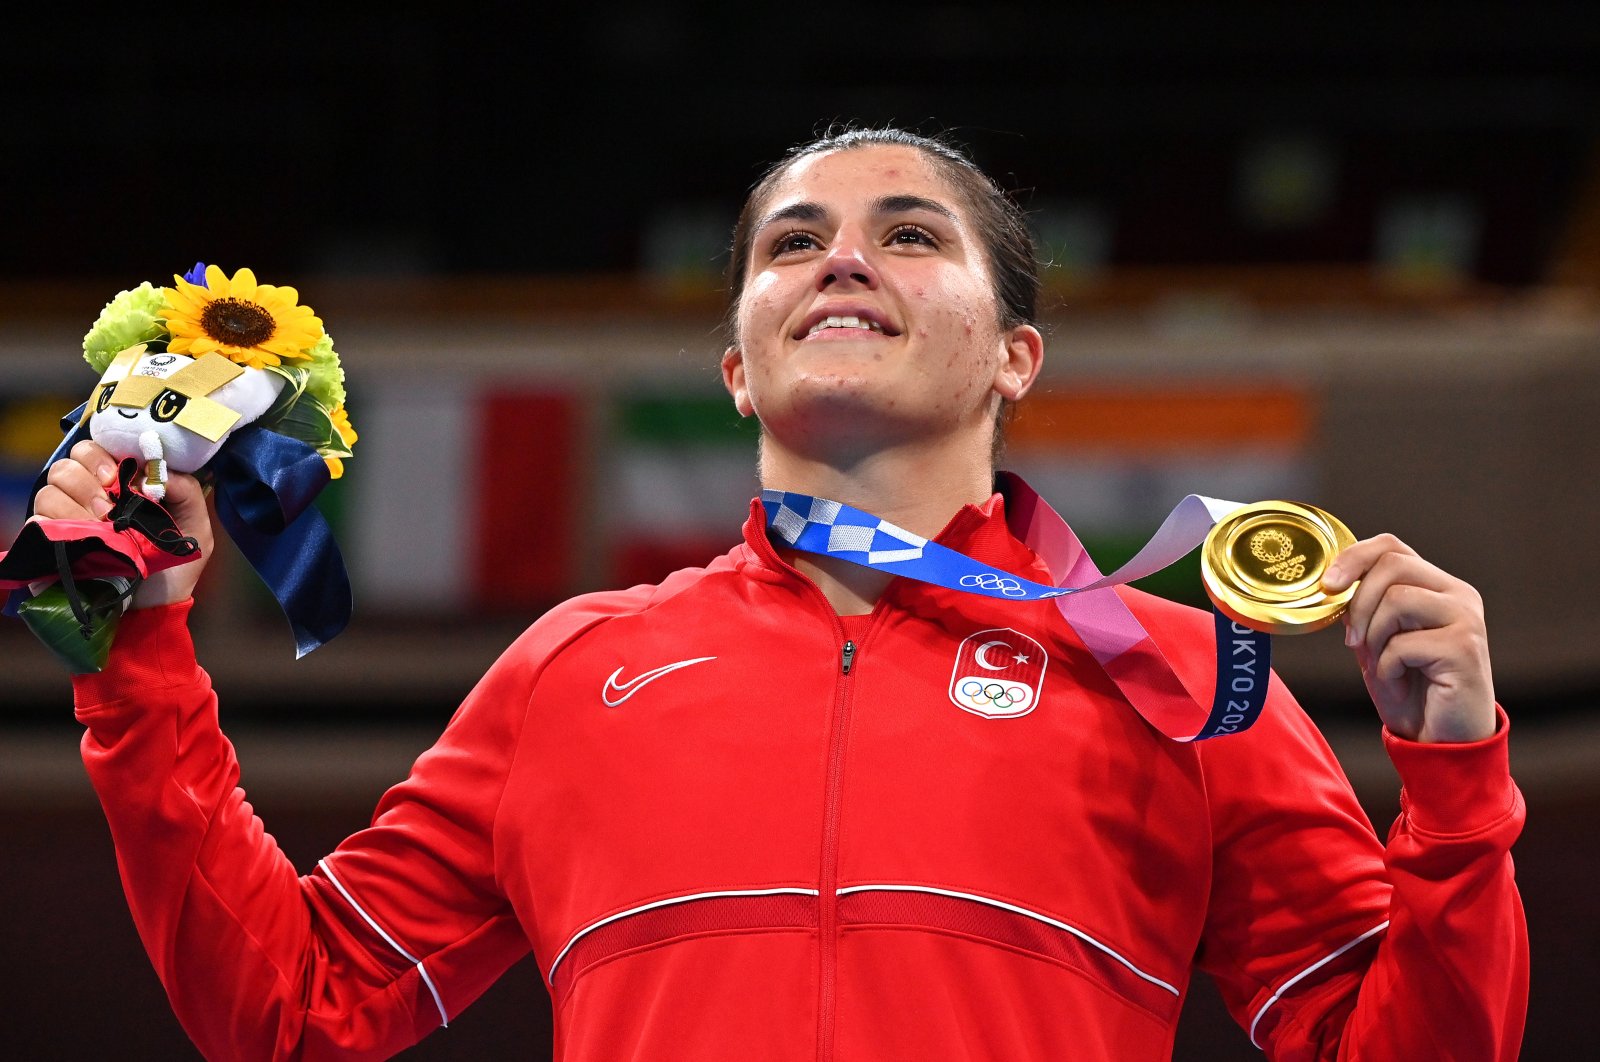 Türkiye&#039;s Busenaz Sürmeneli poses for a photo with her gold medal during the medal ceremony for the women&#039;s welter (64-69 kg.) on Day 15 of the Tokyo 2020 Olympic Games at Kokugikan Arena, Tokyo, Japan, Aug. 7, 2021. (Getty Images Photo)